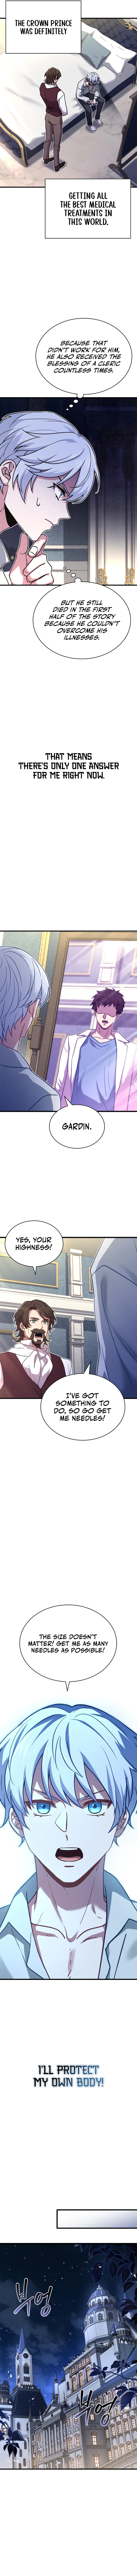 The Crown Prince That Sells Medicine, Chapter 1 image 11